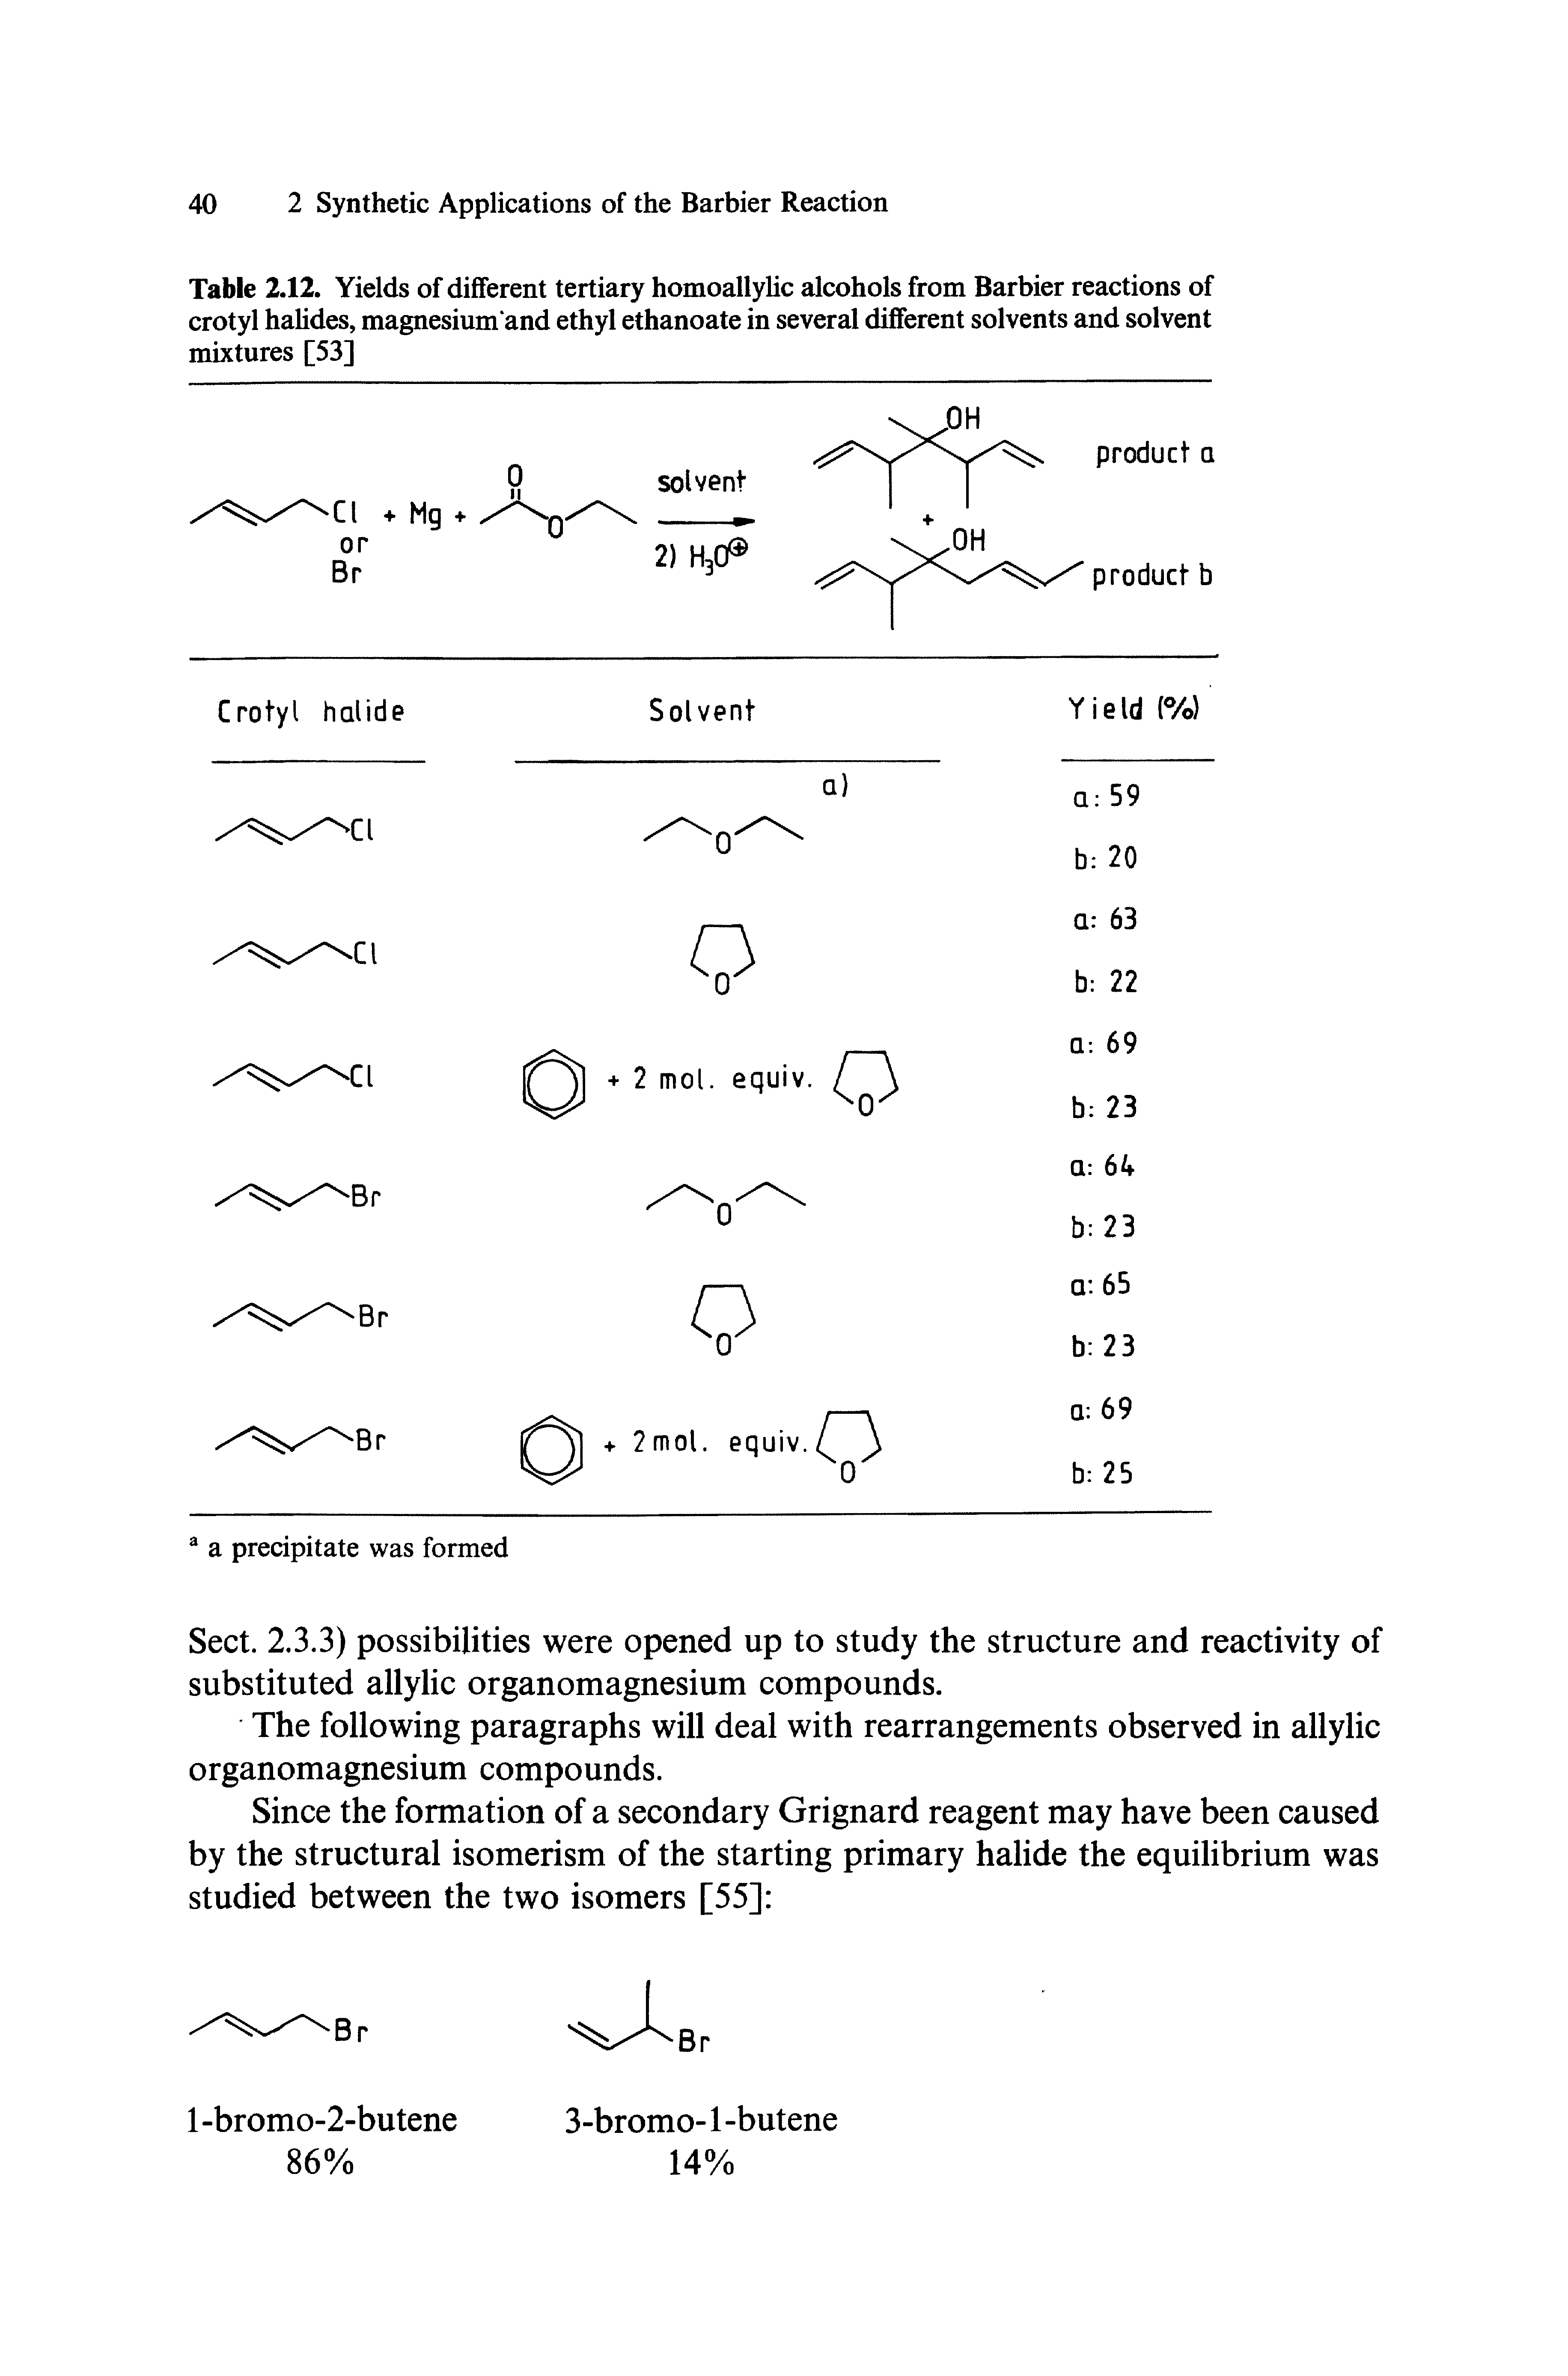 Table 2.12. Yields of different tertiary homoallylic alcohols from Barbier reactions of crotyl halides, magnesium and ethyl ethanoate in several different solvents and solvent mixtures [53]...